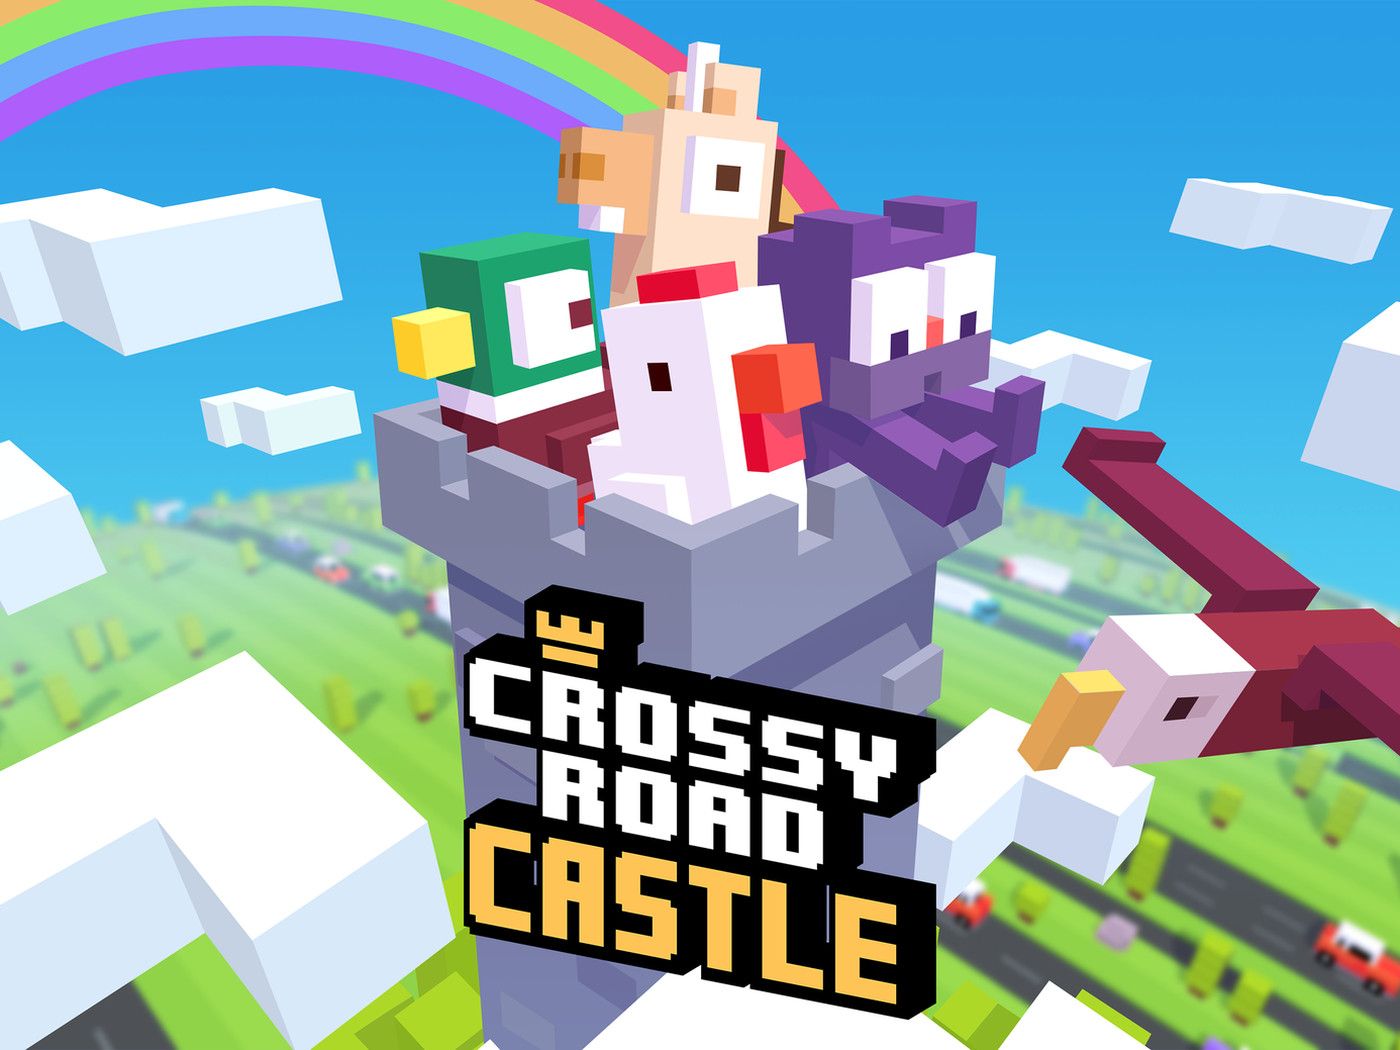 Apple Arcade's latest exclusive is a new Crossy Road spinoff